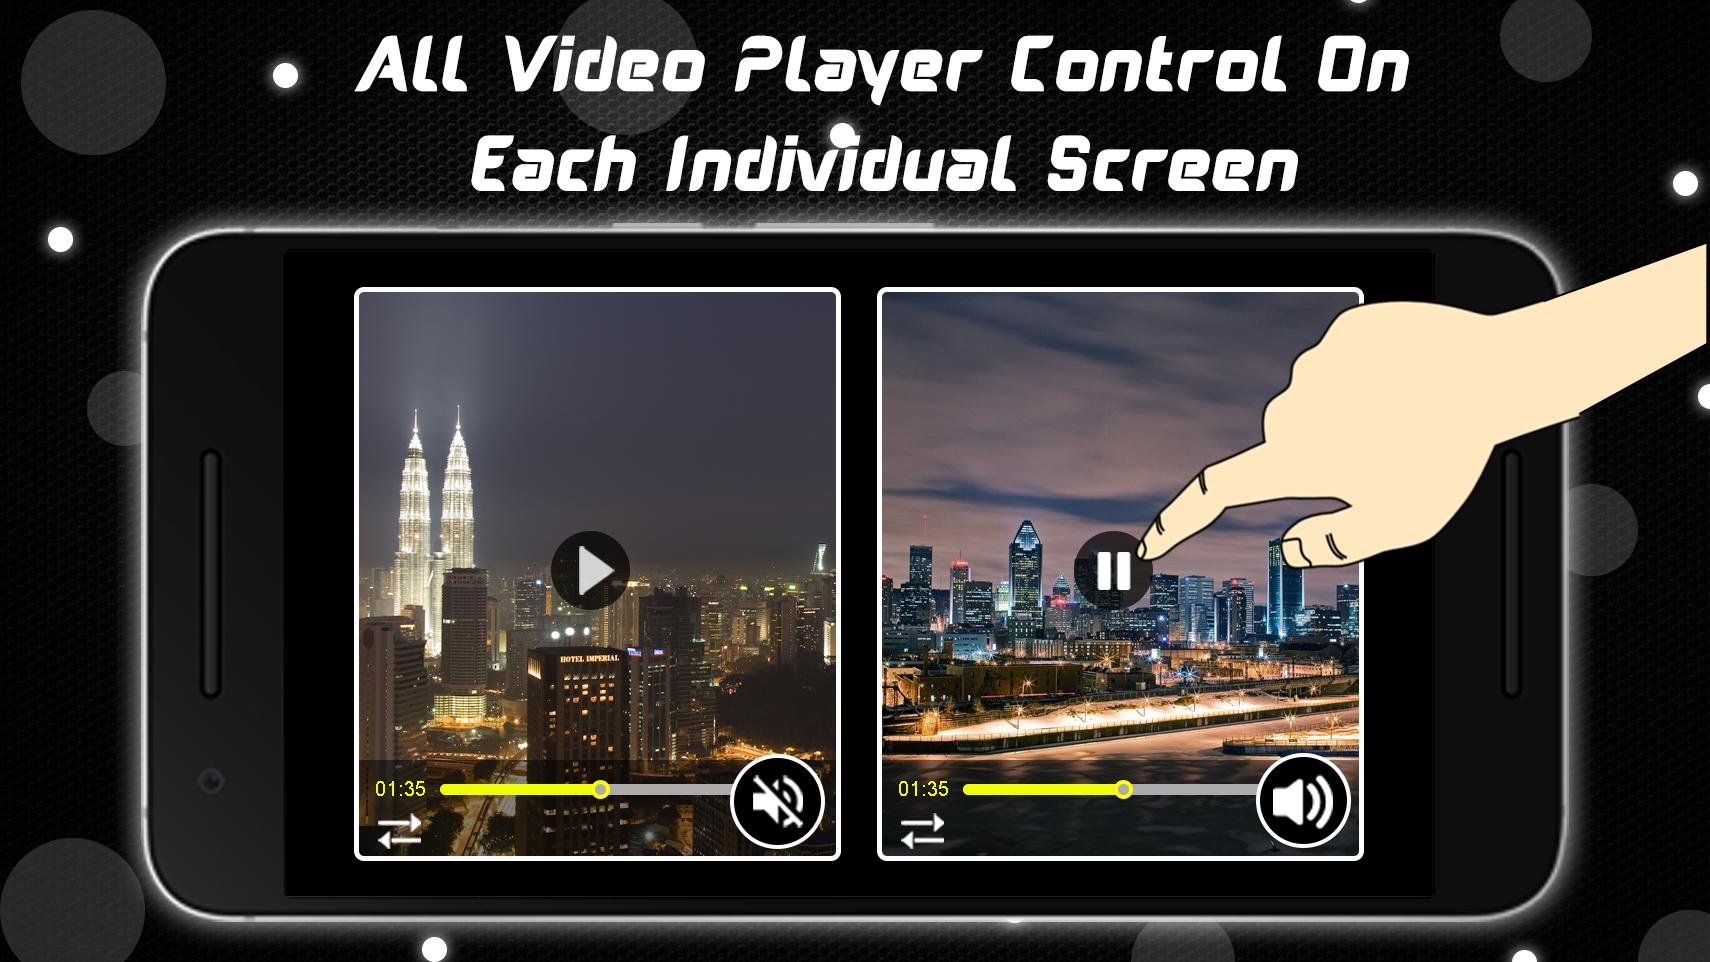 Multi Screen Video Player For Android Apk Download - roblox multi screen download